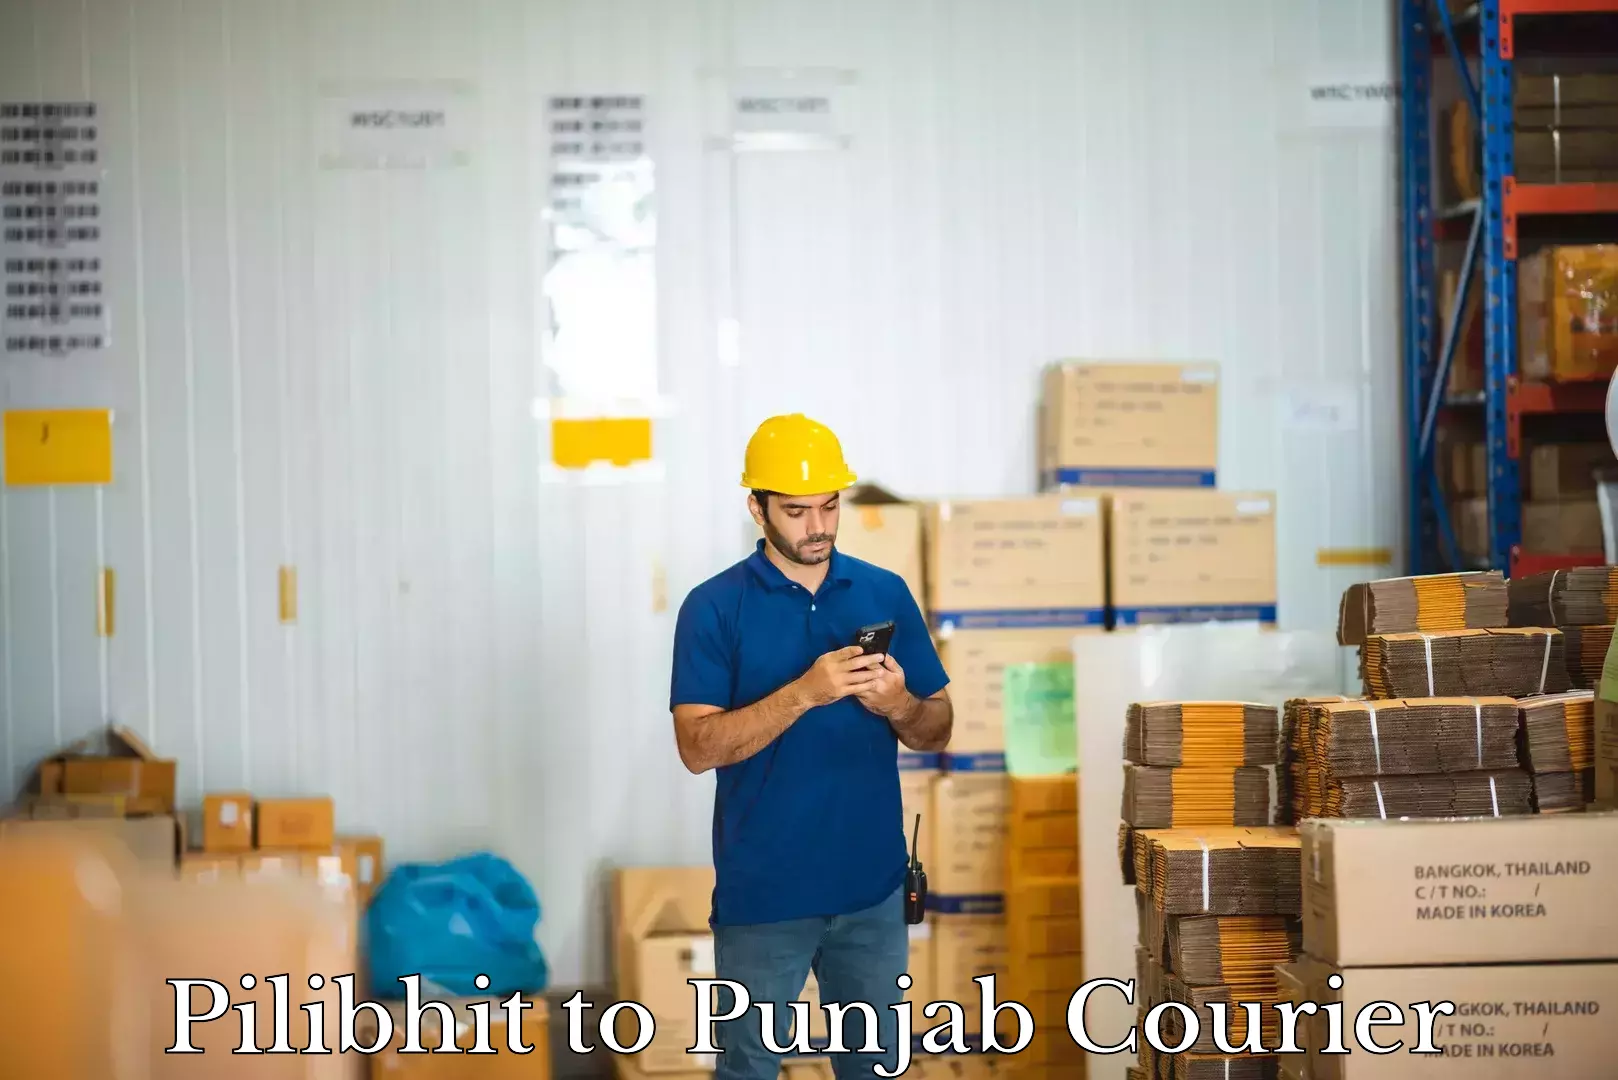 Baggage transport network Pilibhit to Mohali